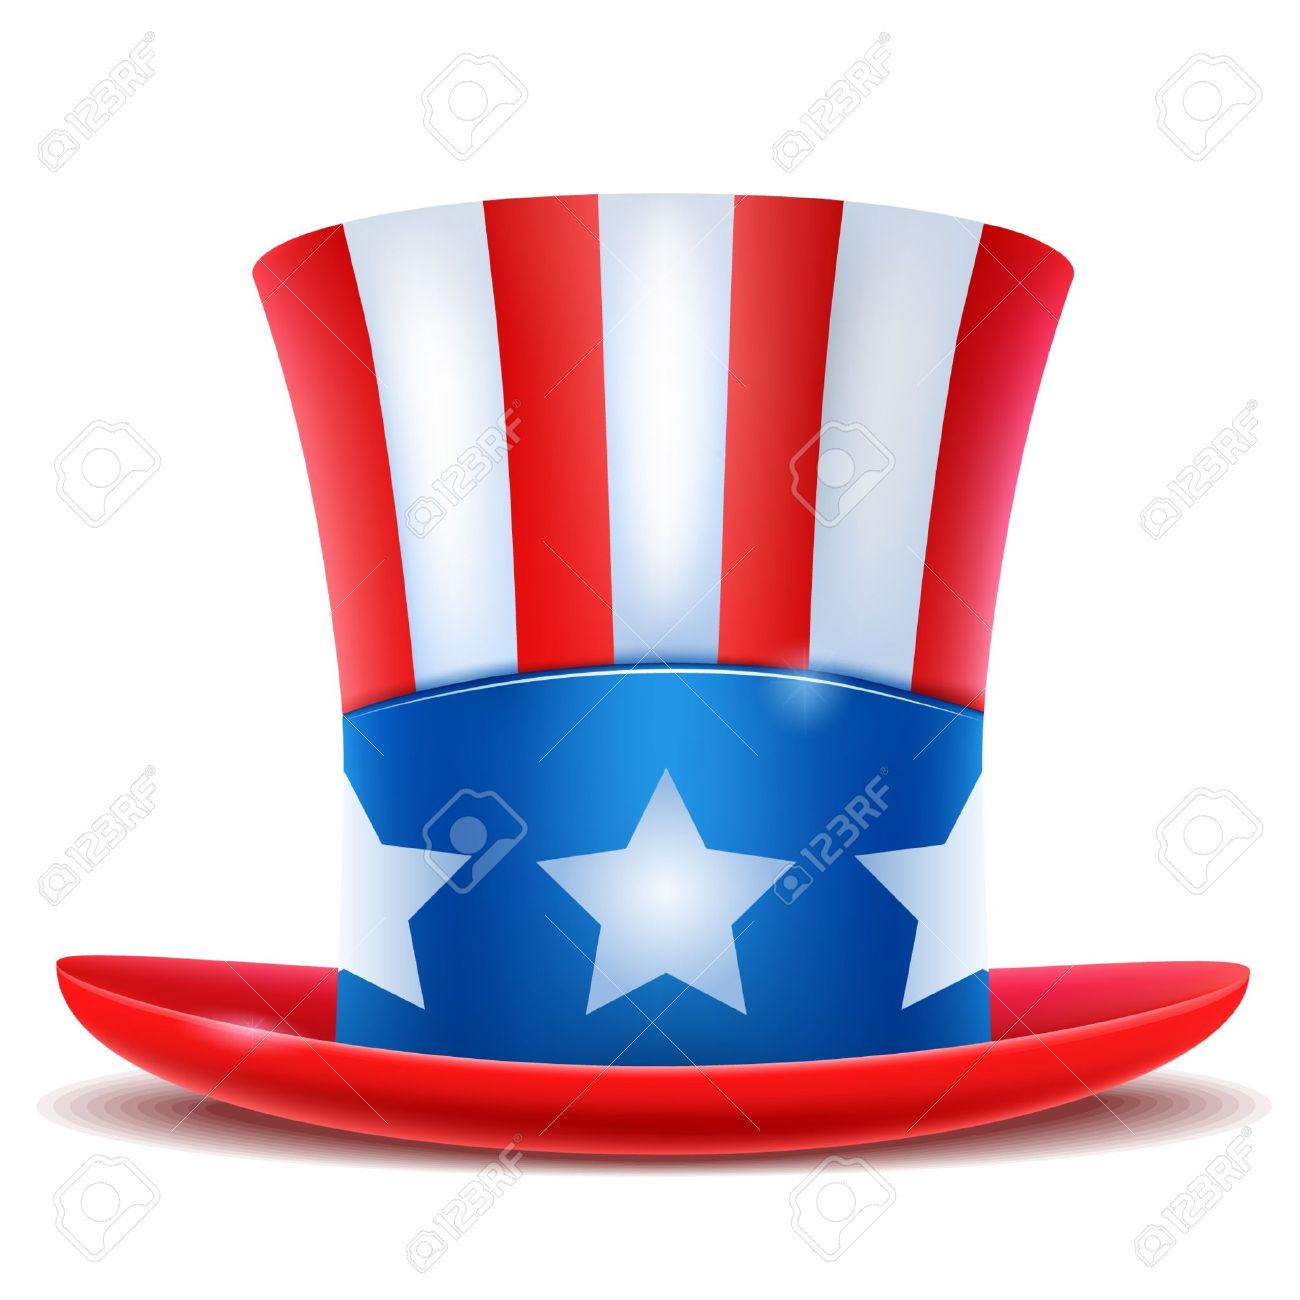 22,775 Fourth Of July Cliparts, Stock Vector And Royalty Free.